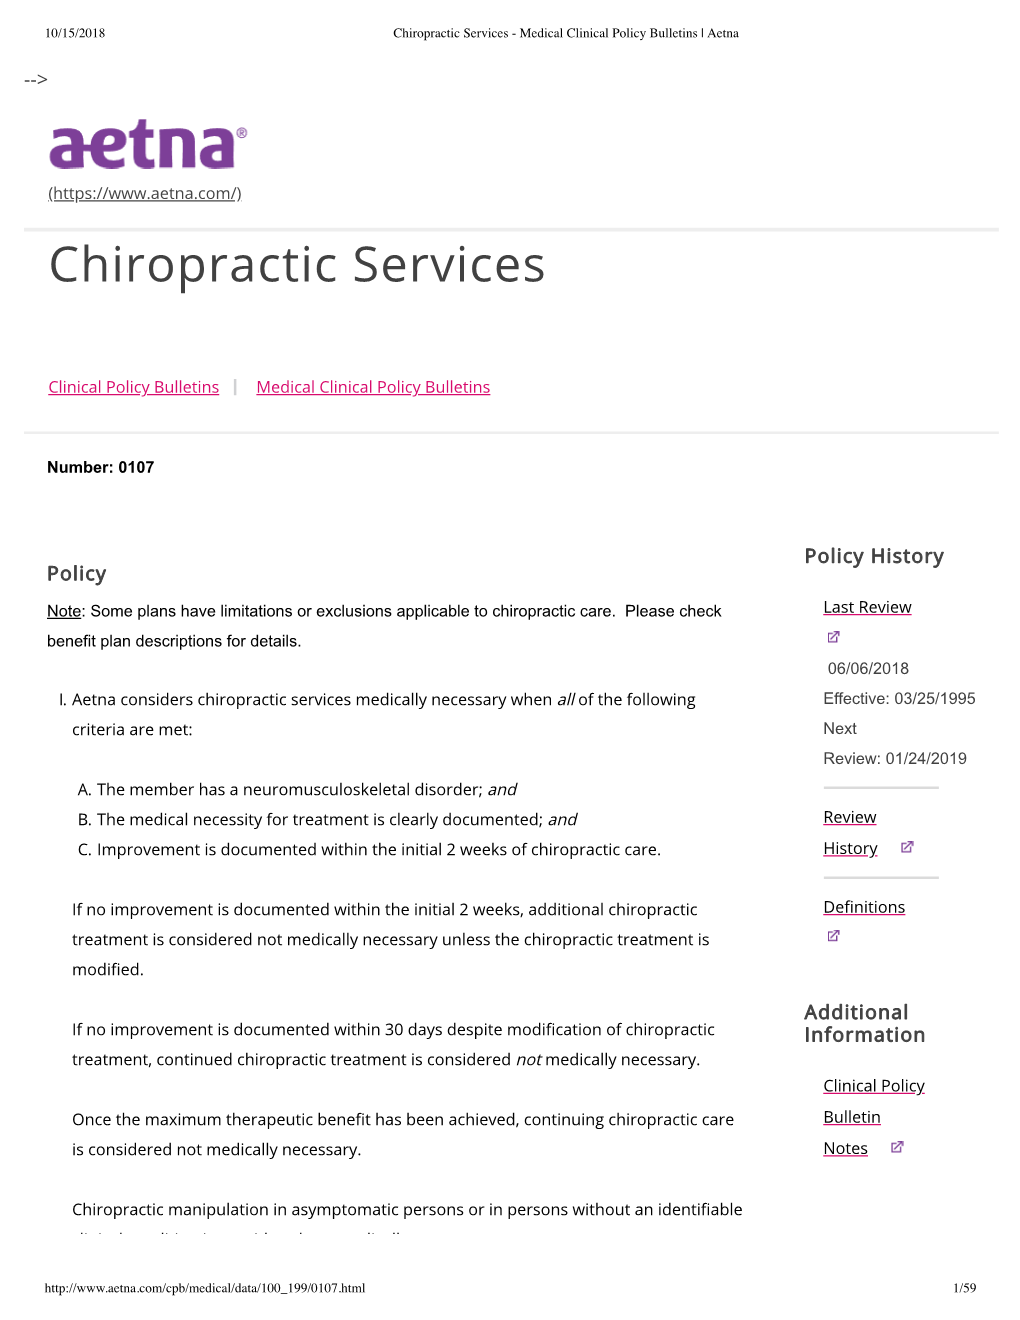 Chiropractic Services - Medical Clinical Policy Bulletins | Aetna